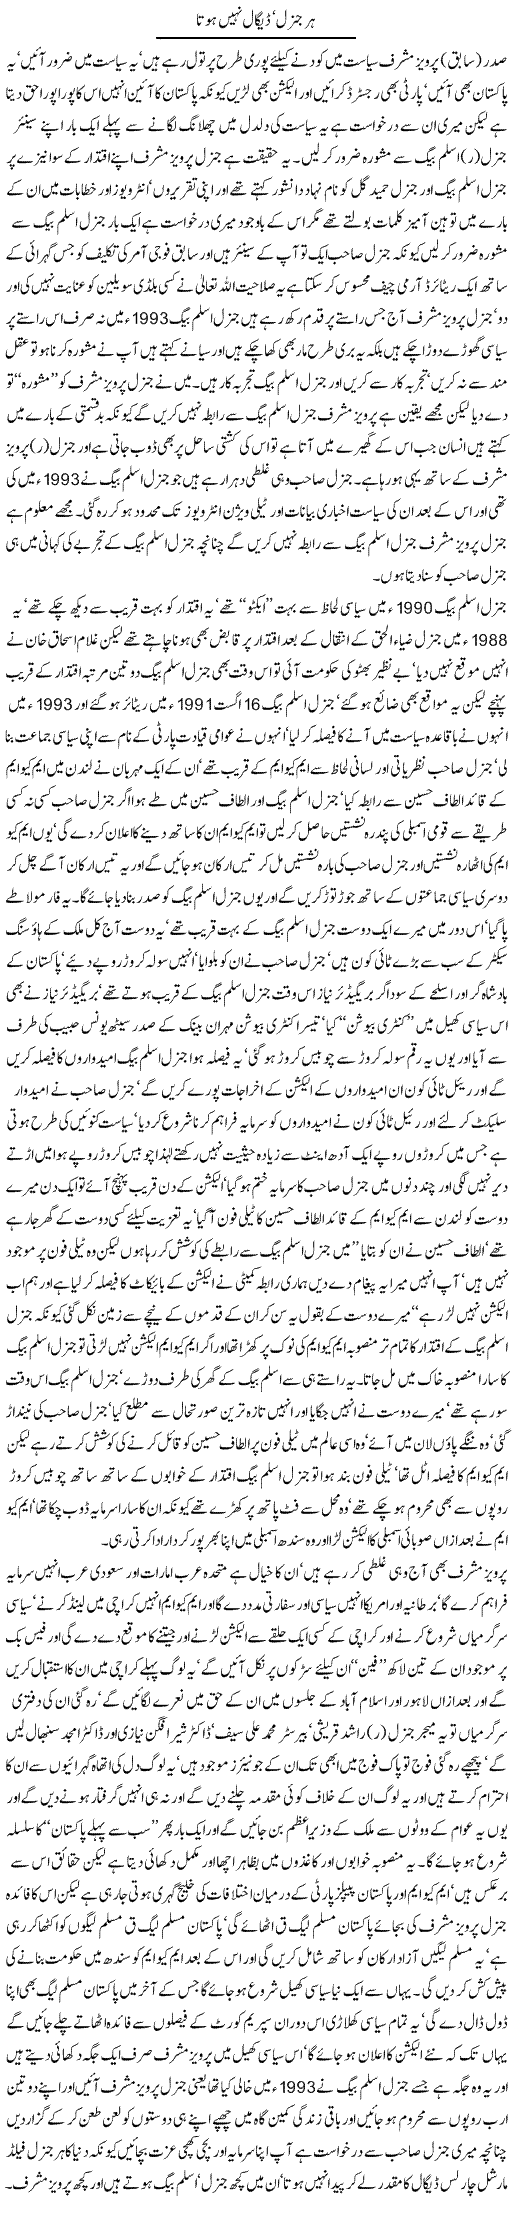 Every General Not De Gaulle Express Column Javed Chaudhry 23 September 2010